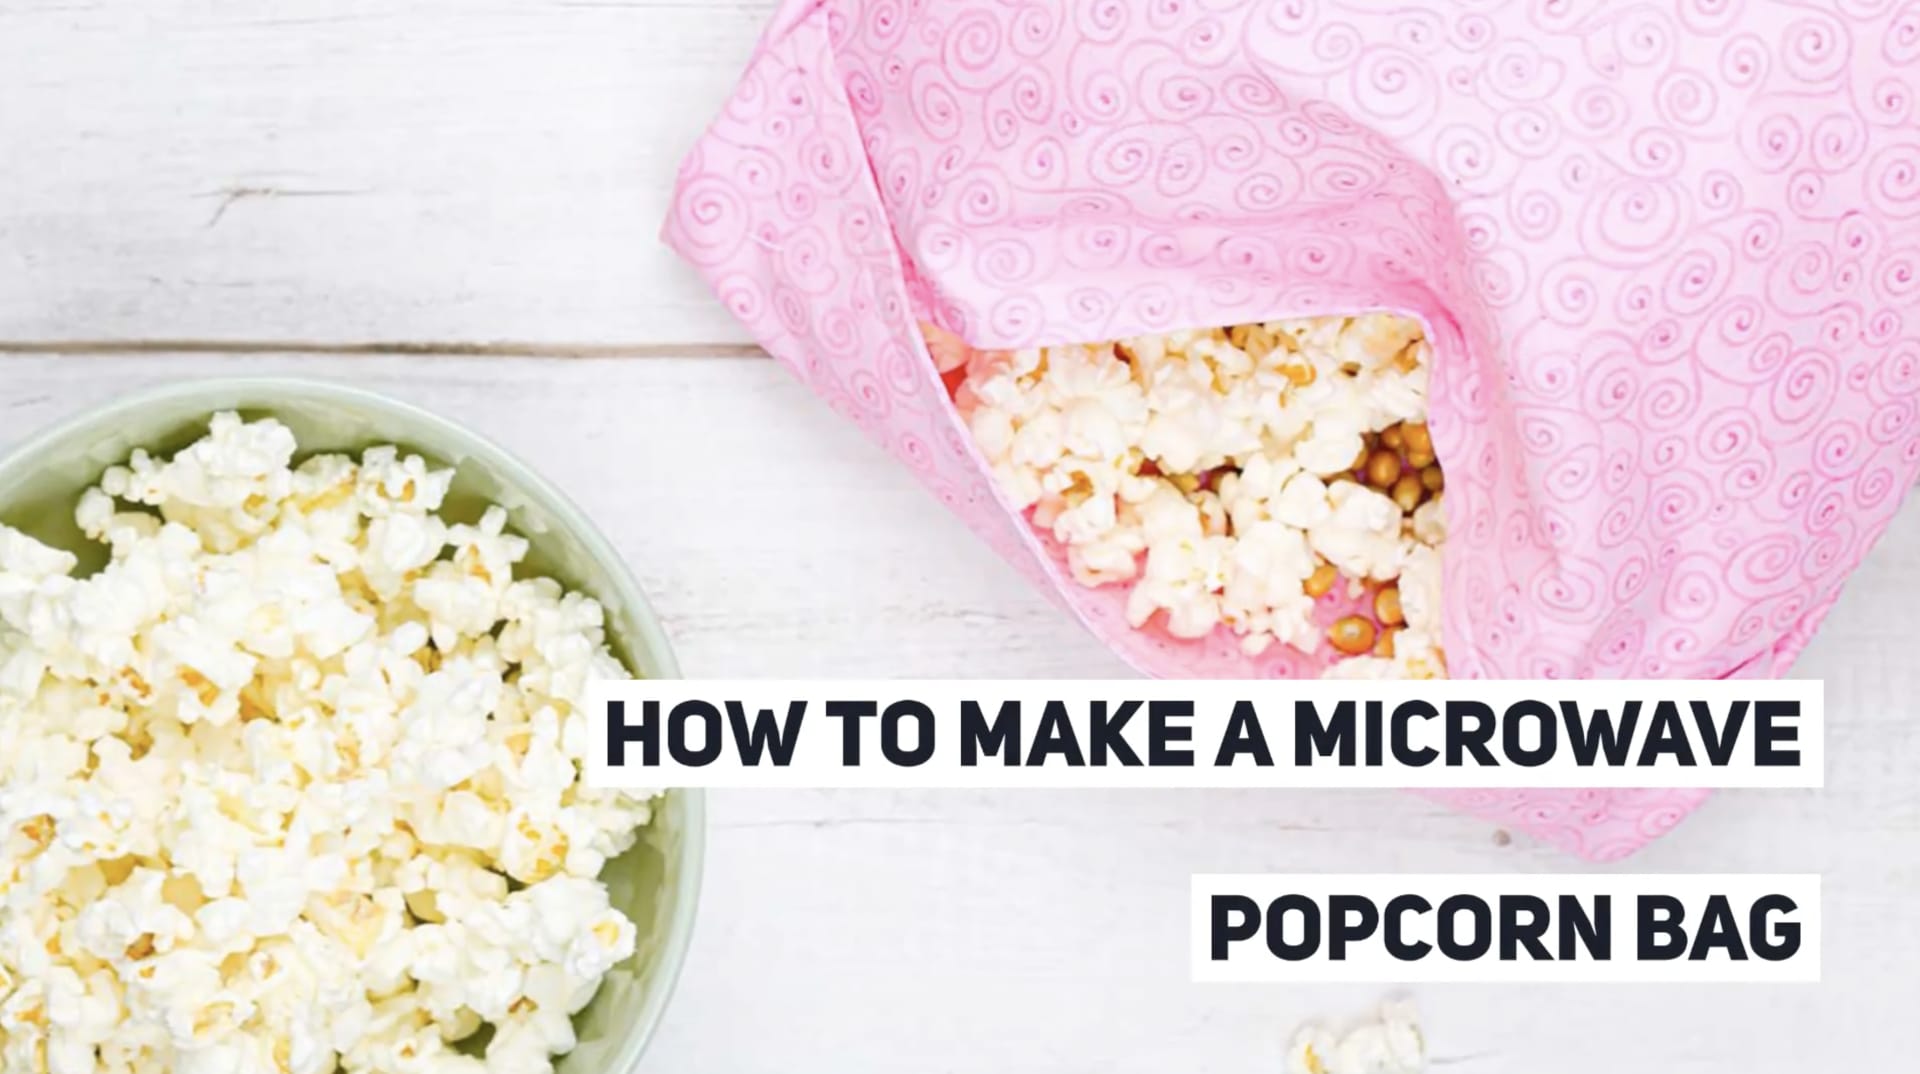 Buy ACT II Microwave Popcorn Original 33 gm Pouch Online at Best Price. of  Rs 27 - bigbasket